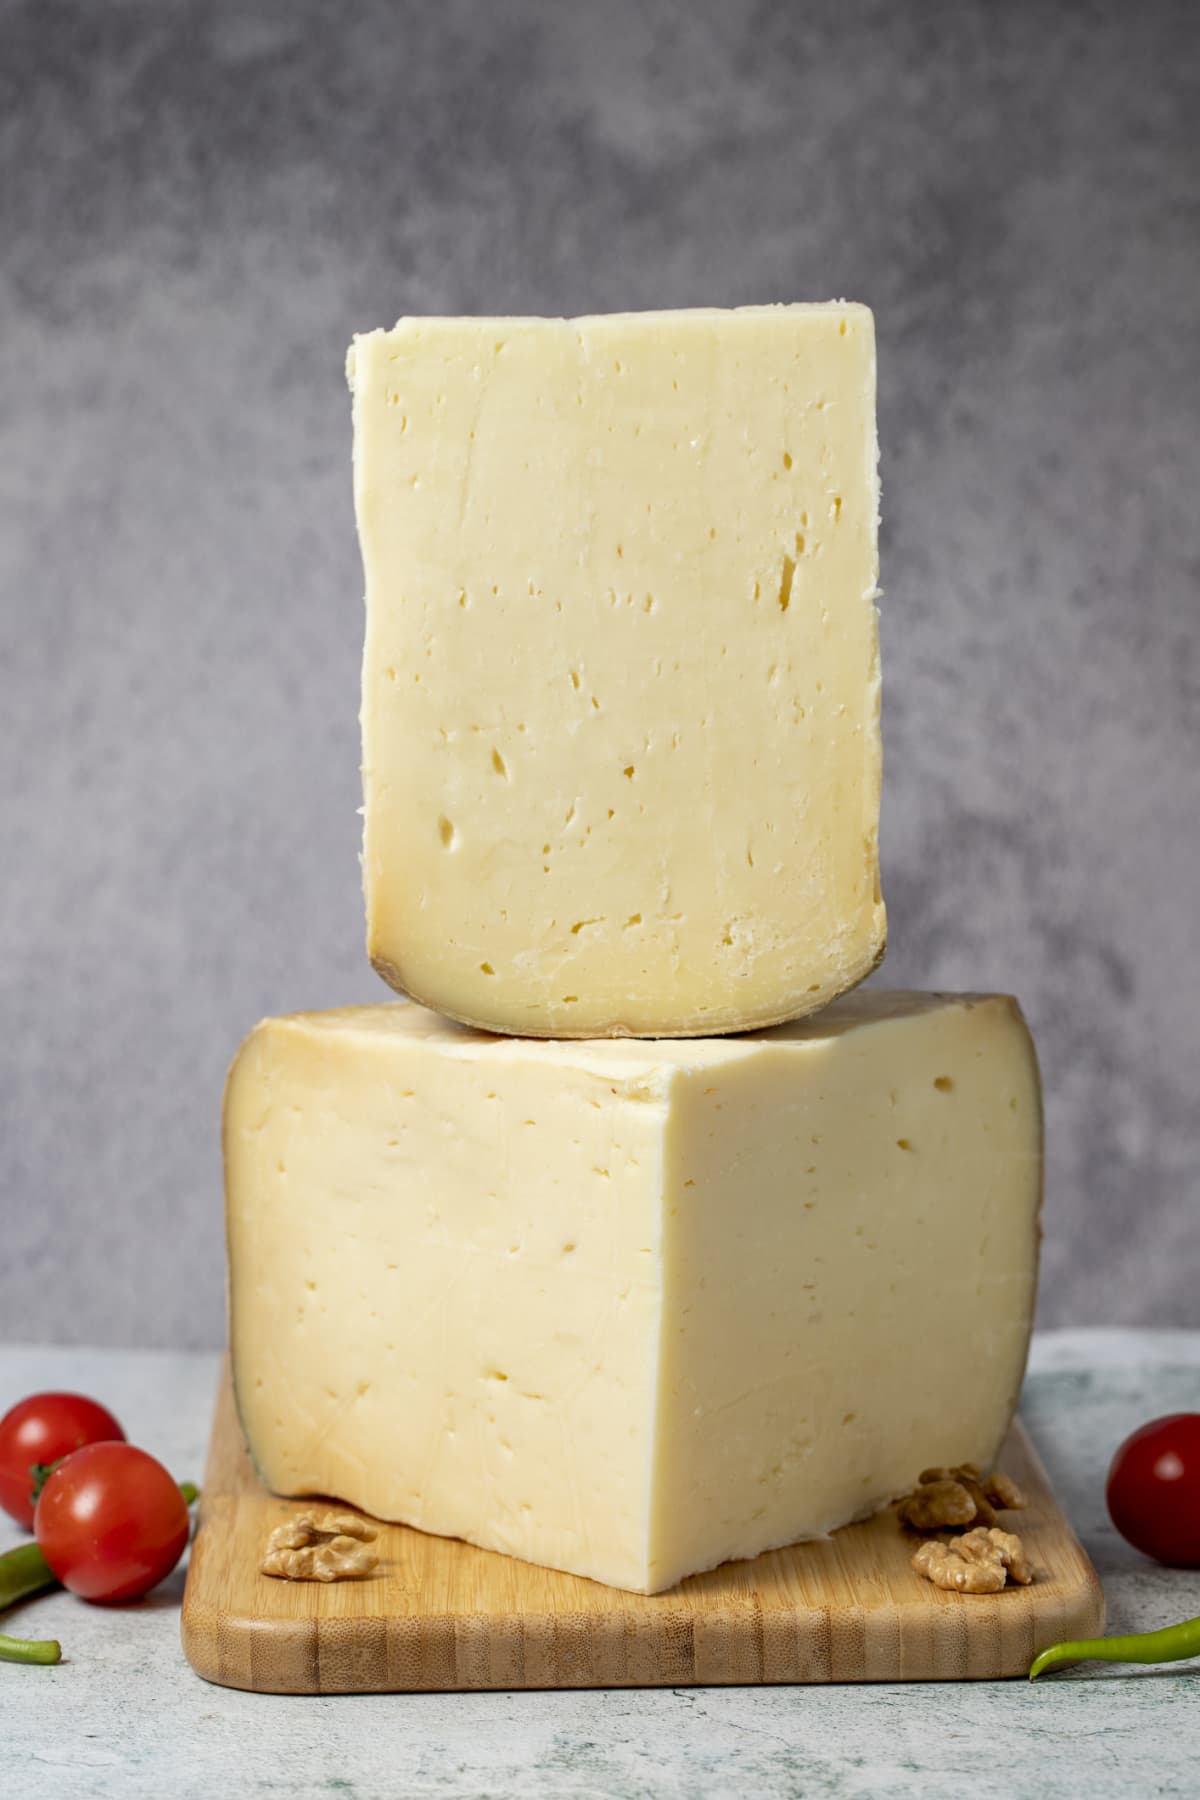 Large blocks of Gruyère cheese on a wooden cutting board